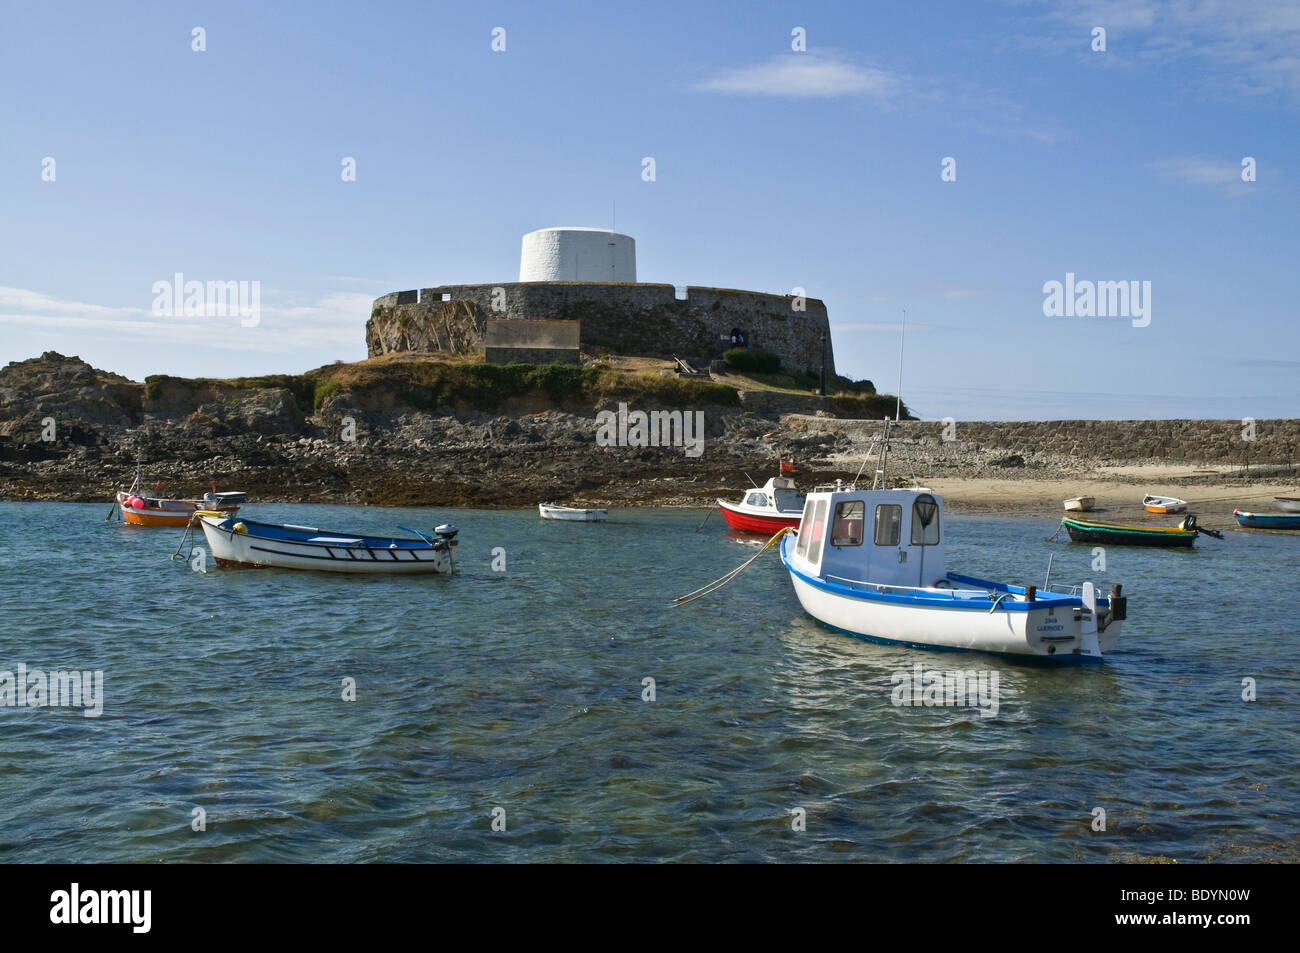 dh Fort Grey ST PIERRE DU BOIS GUERNSEY Fishingboats Rocquaine Bay Martello tower fortress Shipwreck museum channel island historic site islands boats Stock Photo